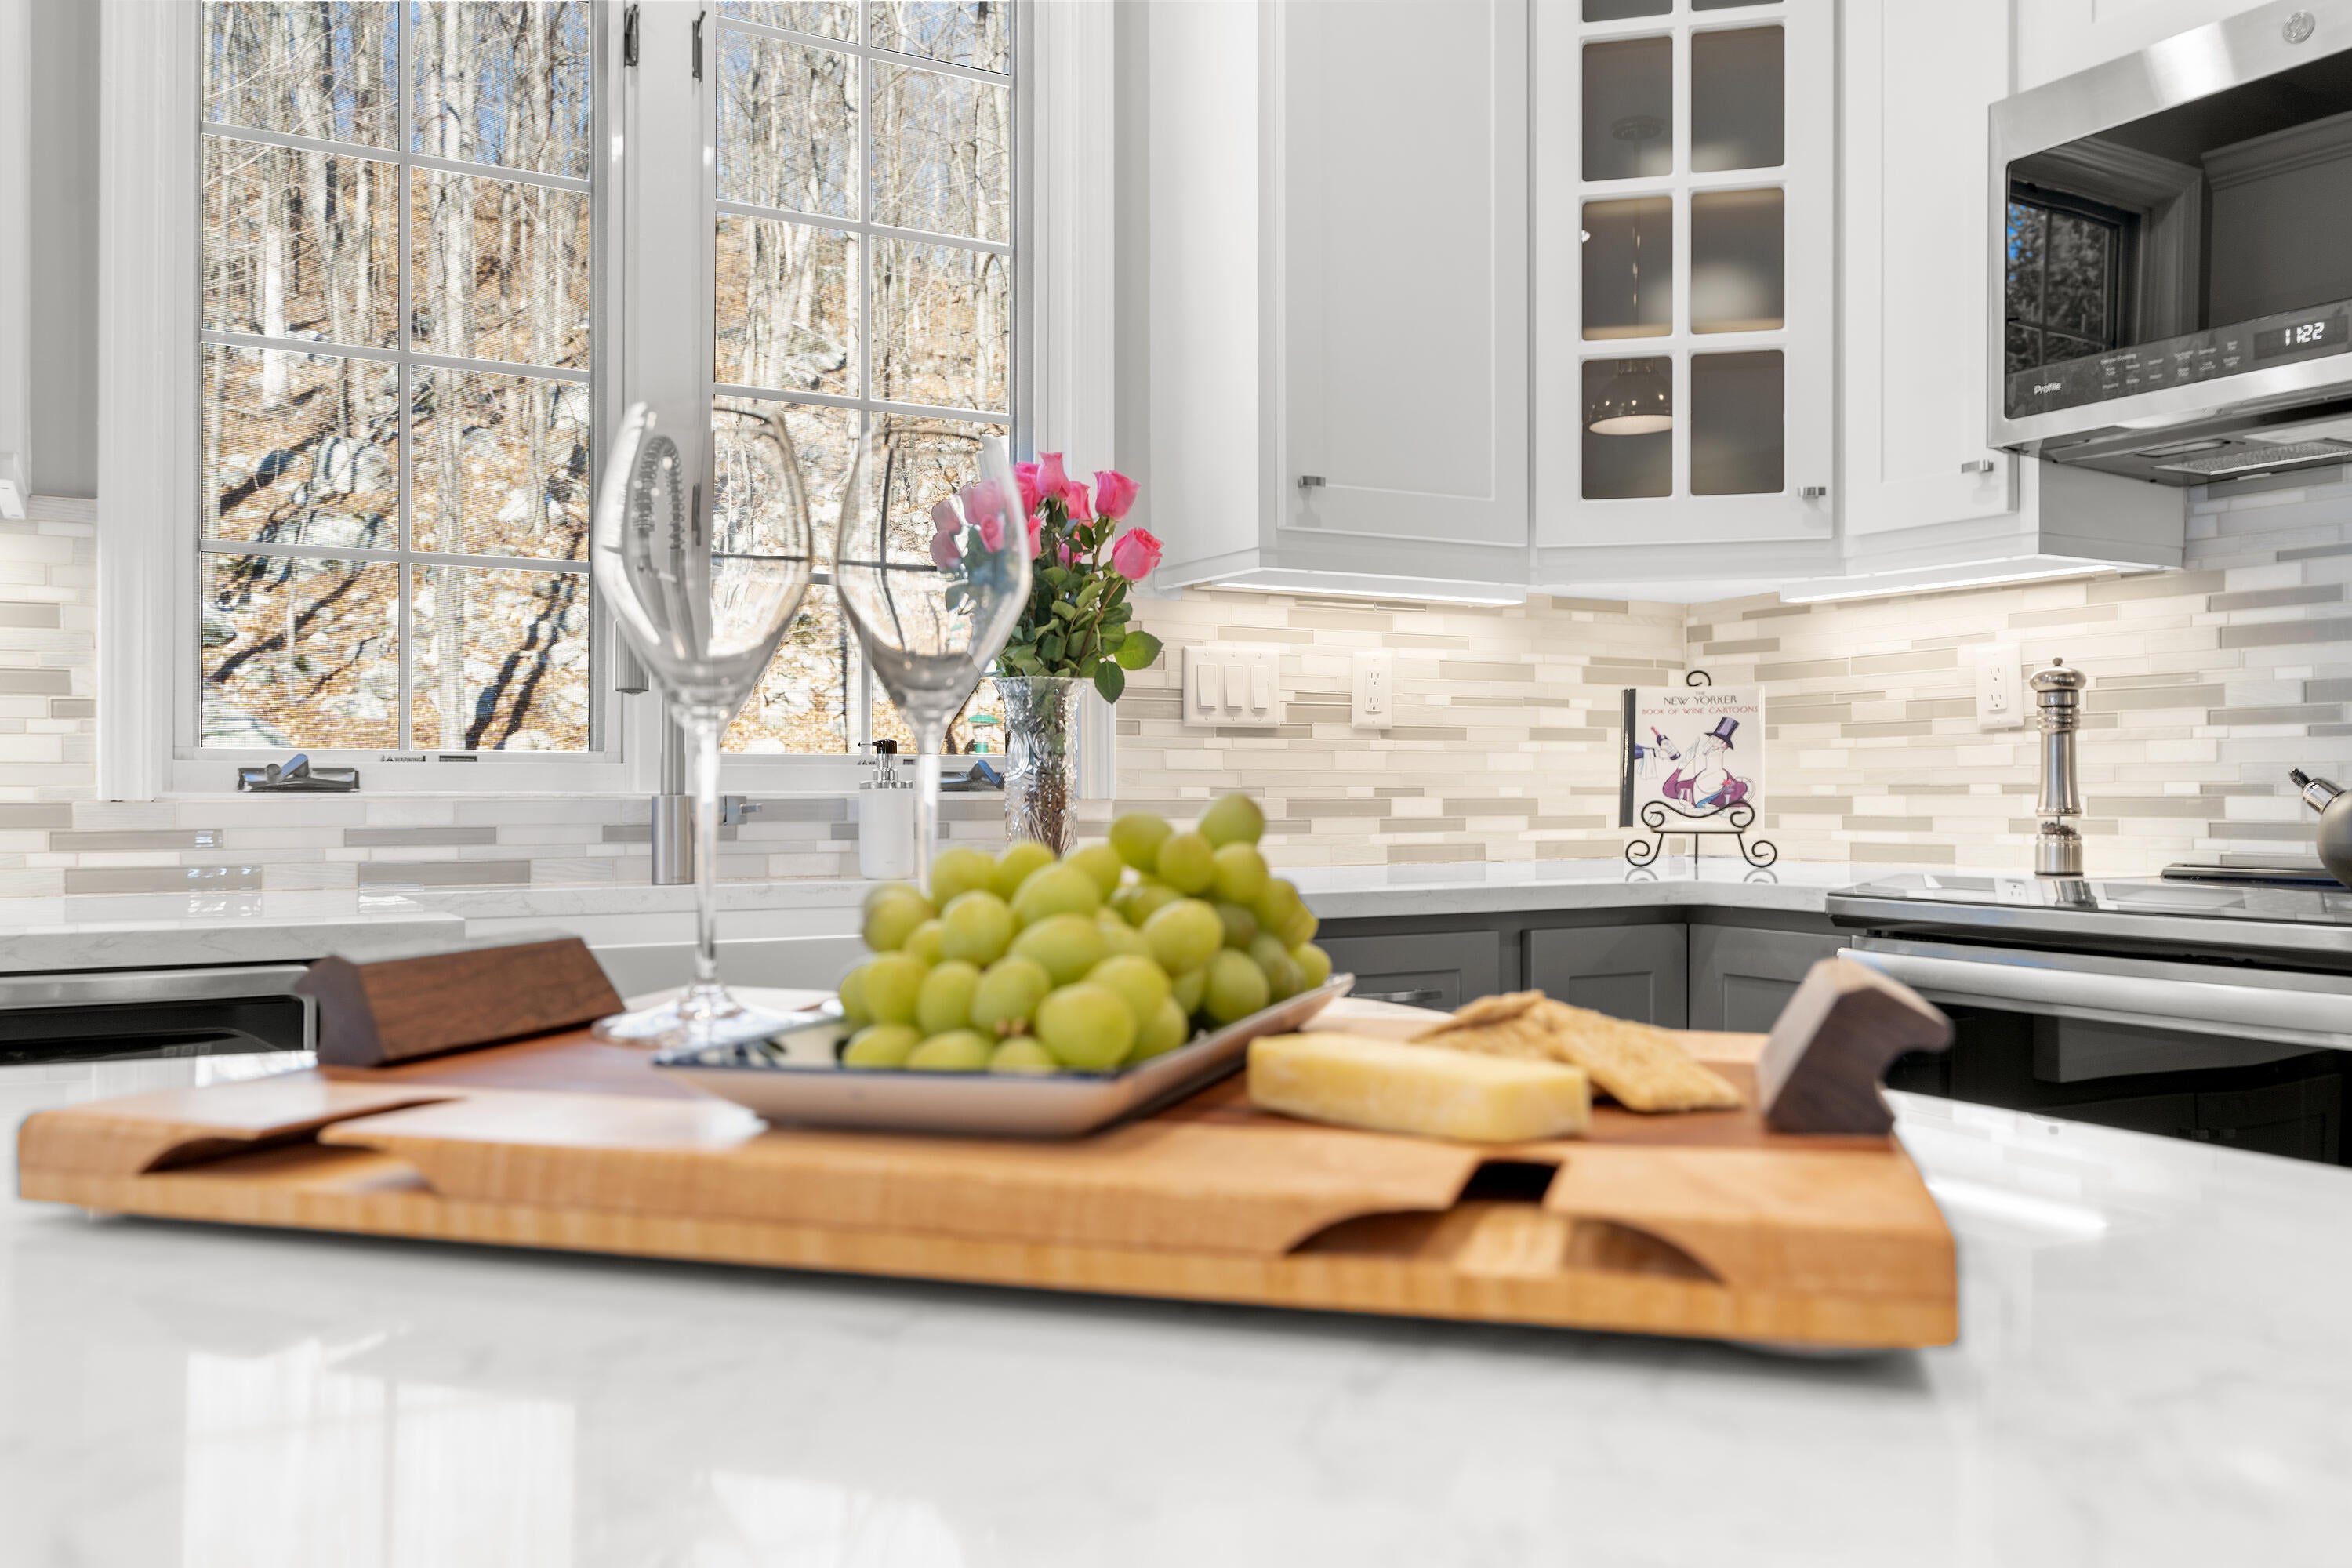 How to Choose The Best Countertop For Your Kitchen